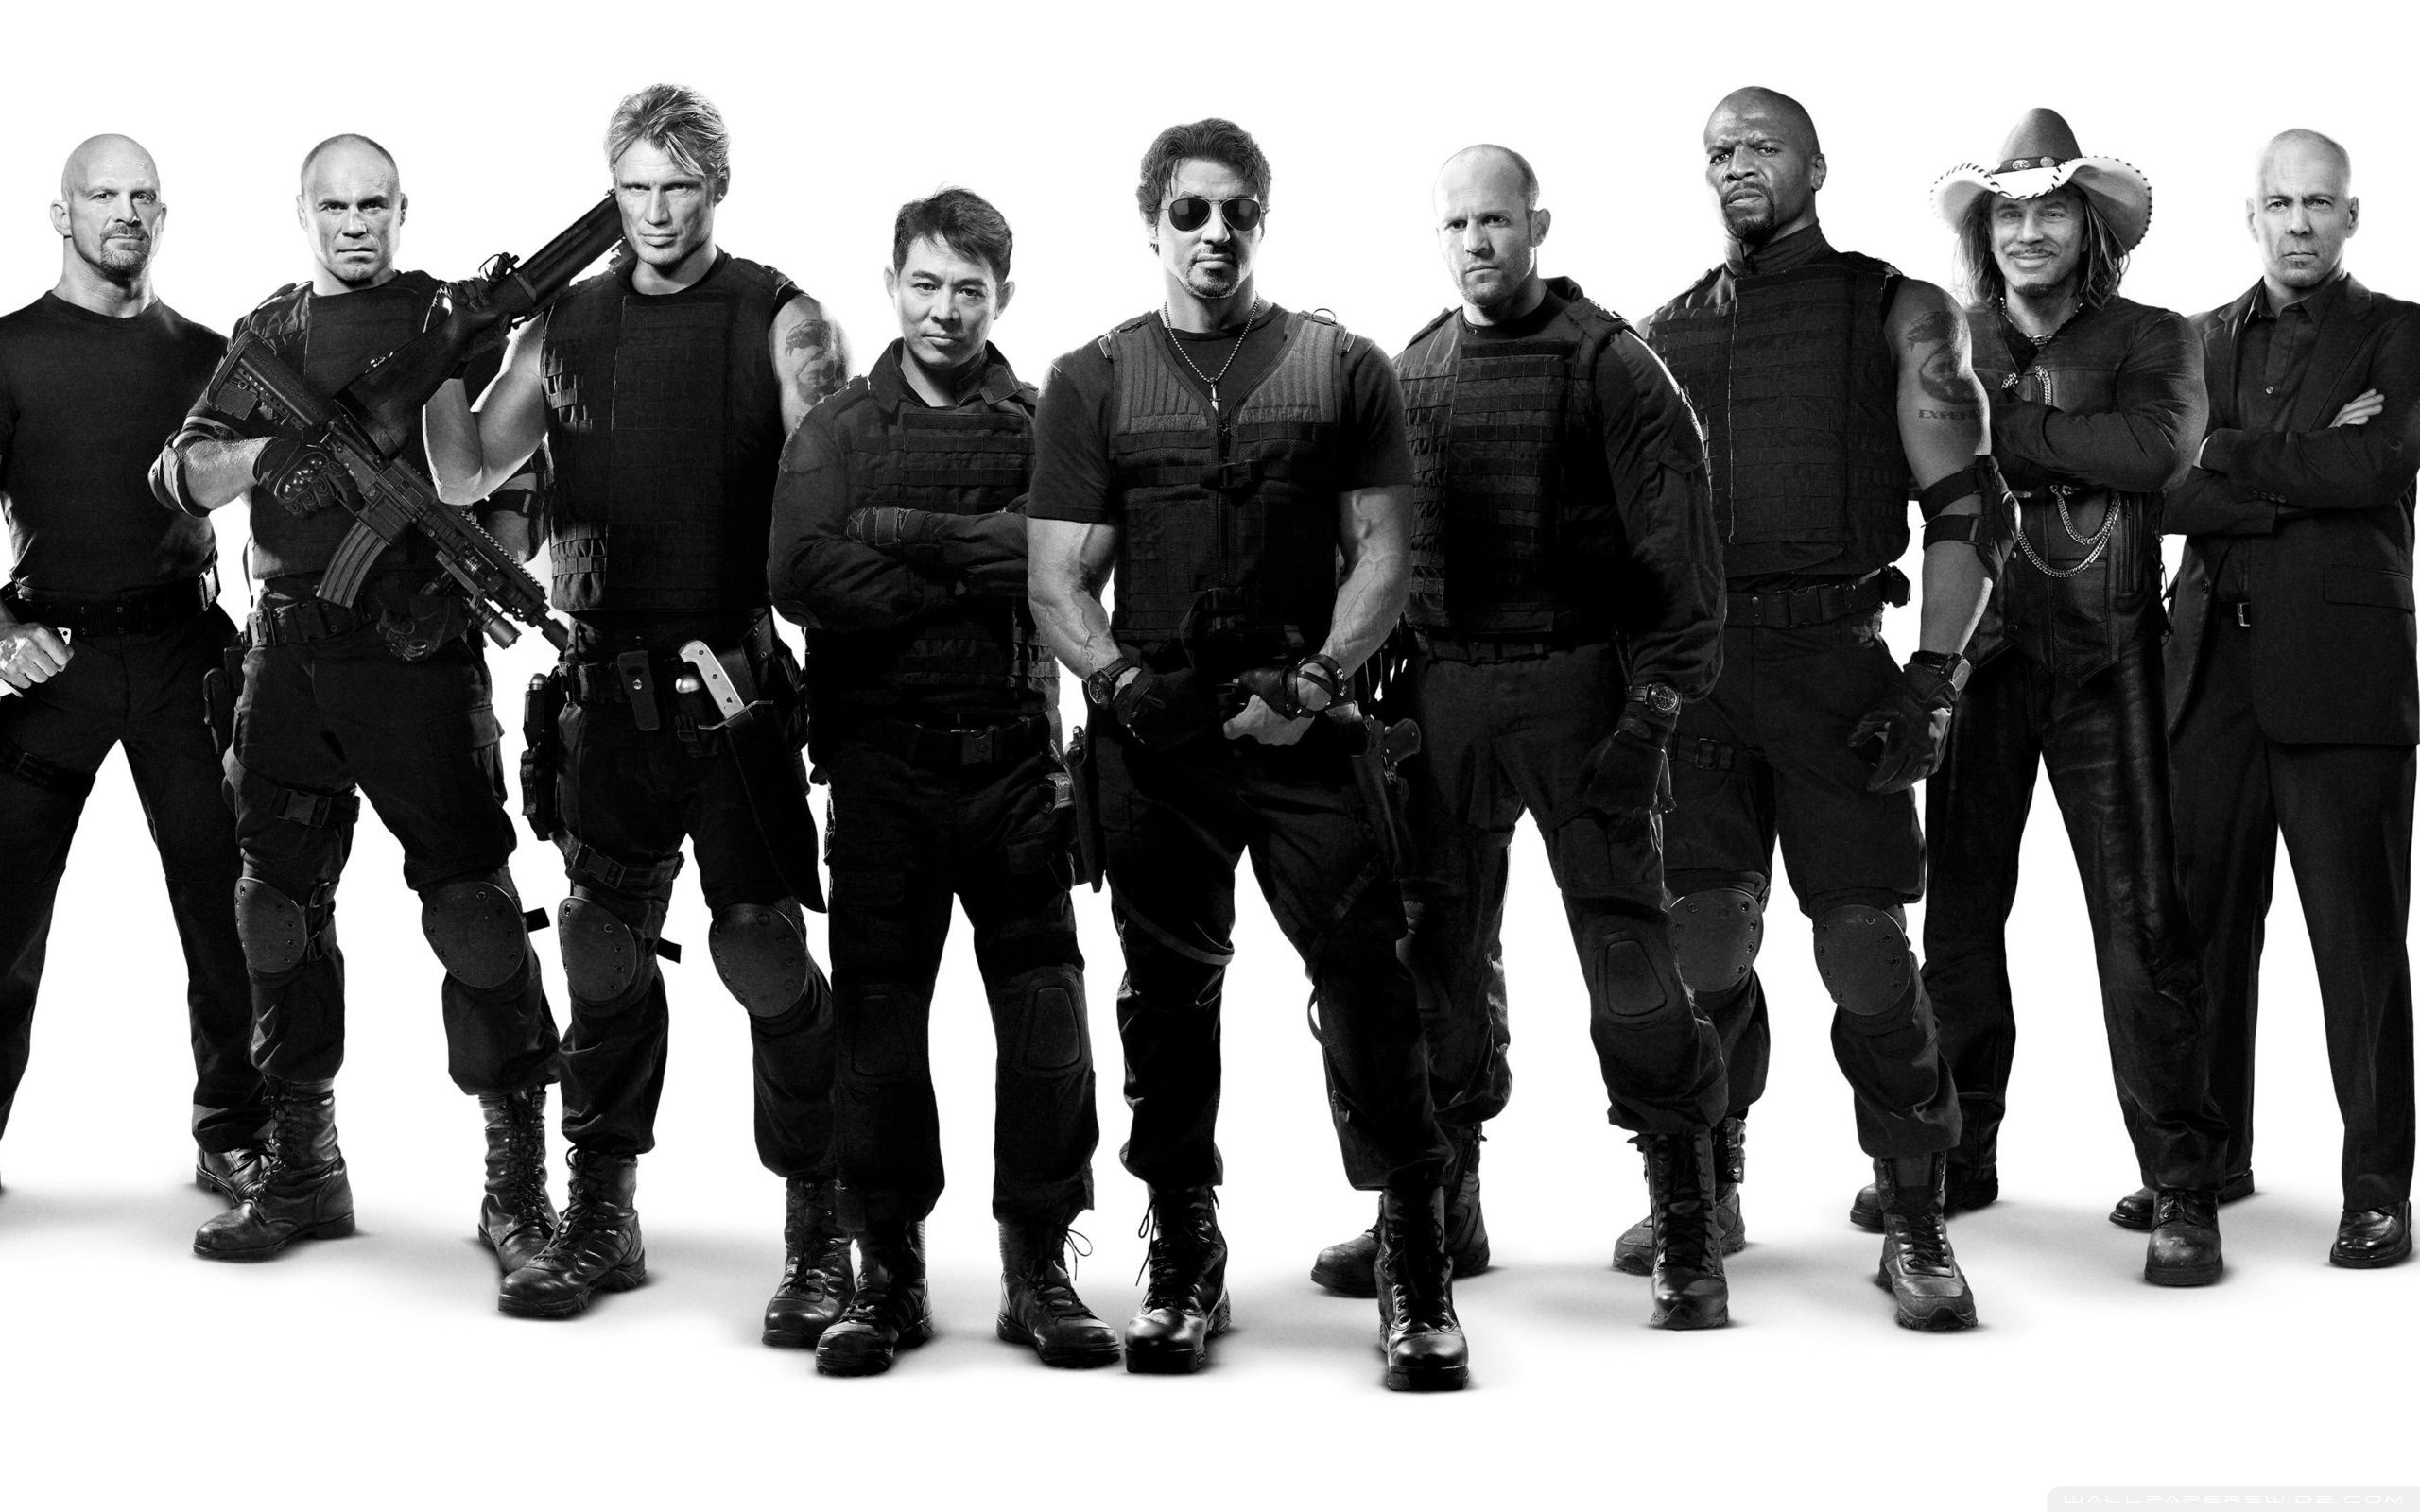 The Expendables wallpapers, Top backgrounds, Explosive action, Star-studded cast, 2560x1600 HD Desktop